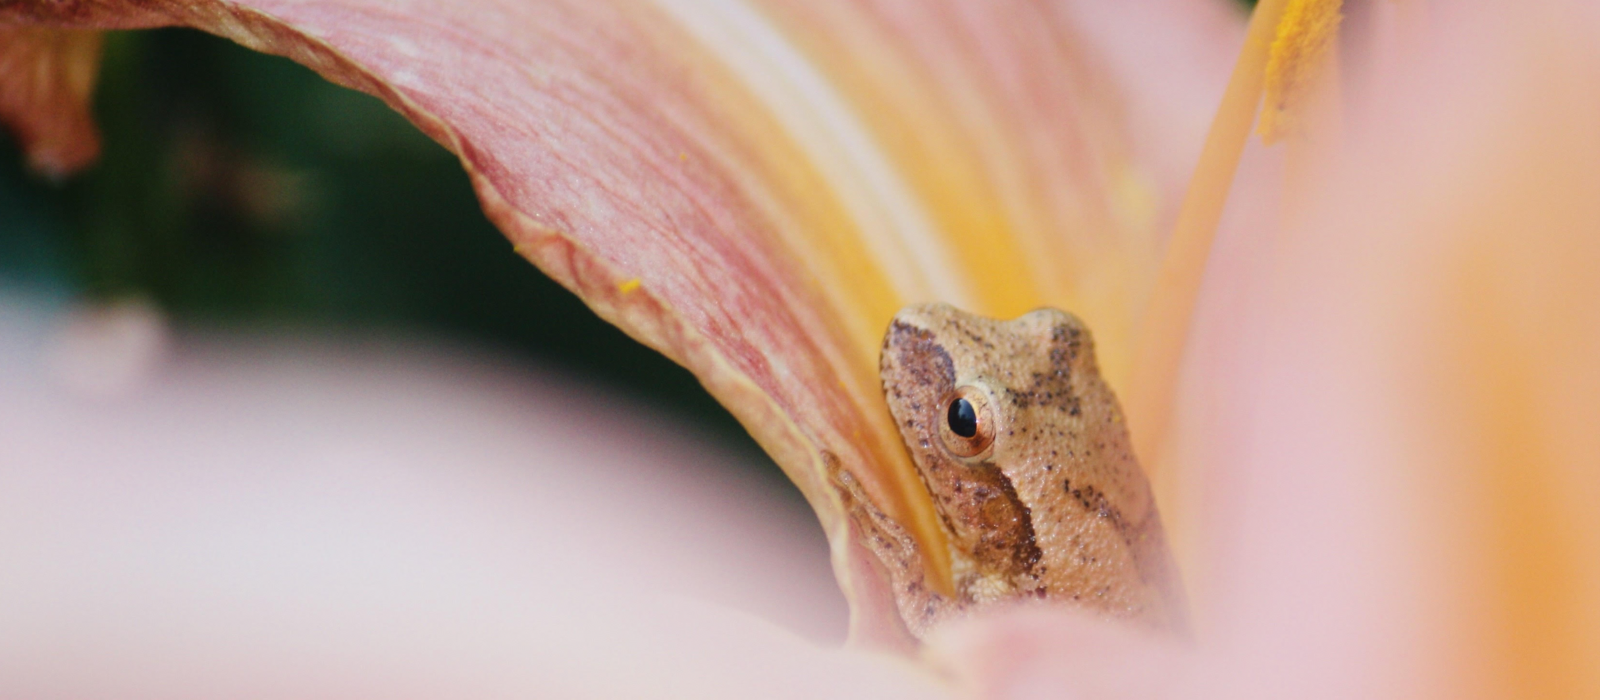 A peeper in a lily. (photo © James Newsom)